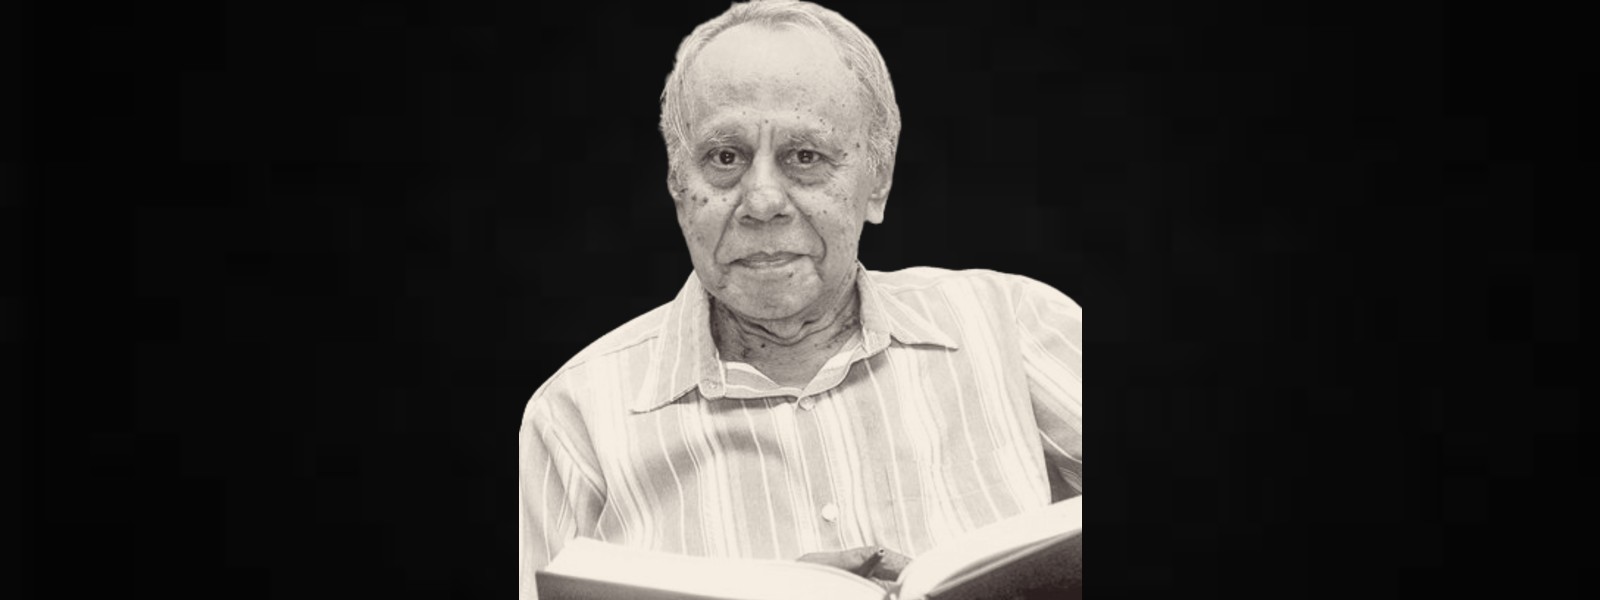 Prof. Wimal Ballagalle dies at age 97